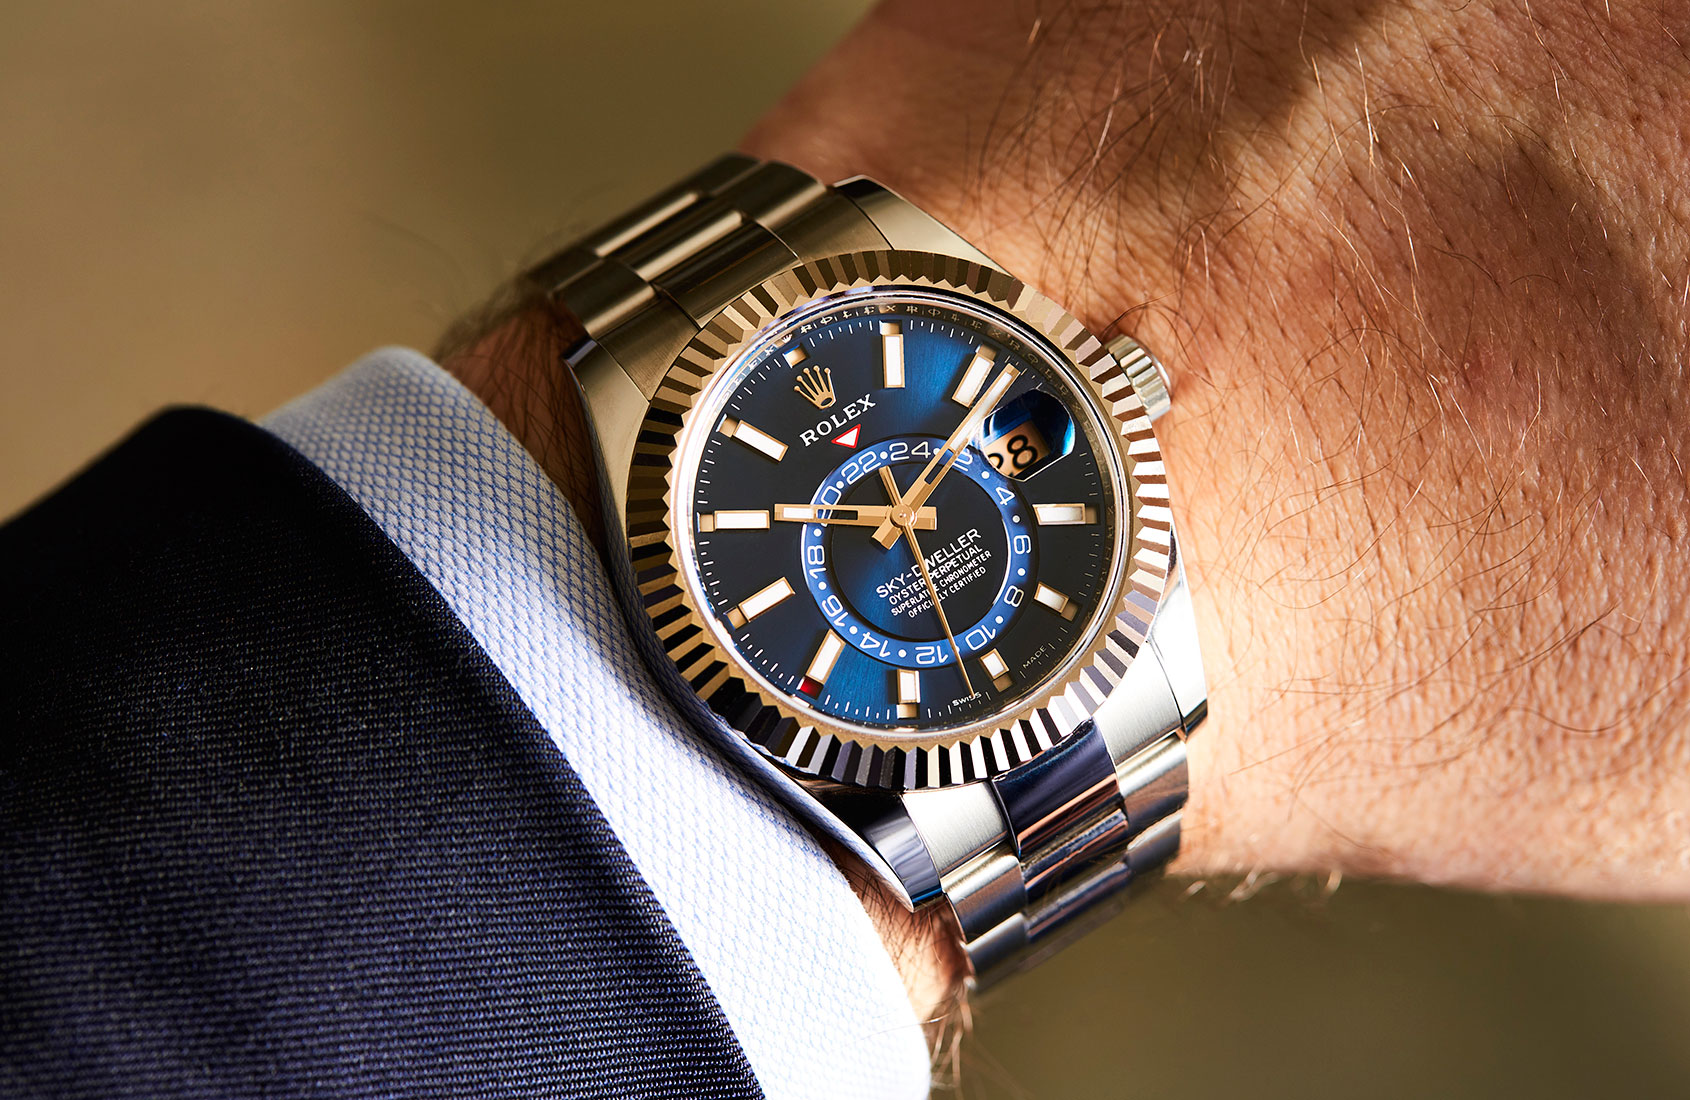 RECOMMENDED WATCHING: The most complicated Rolex available today